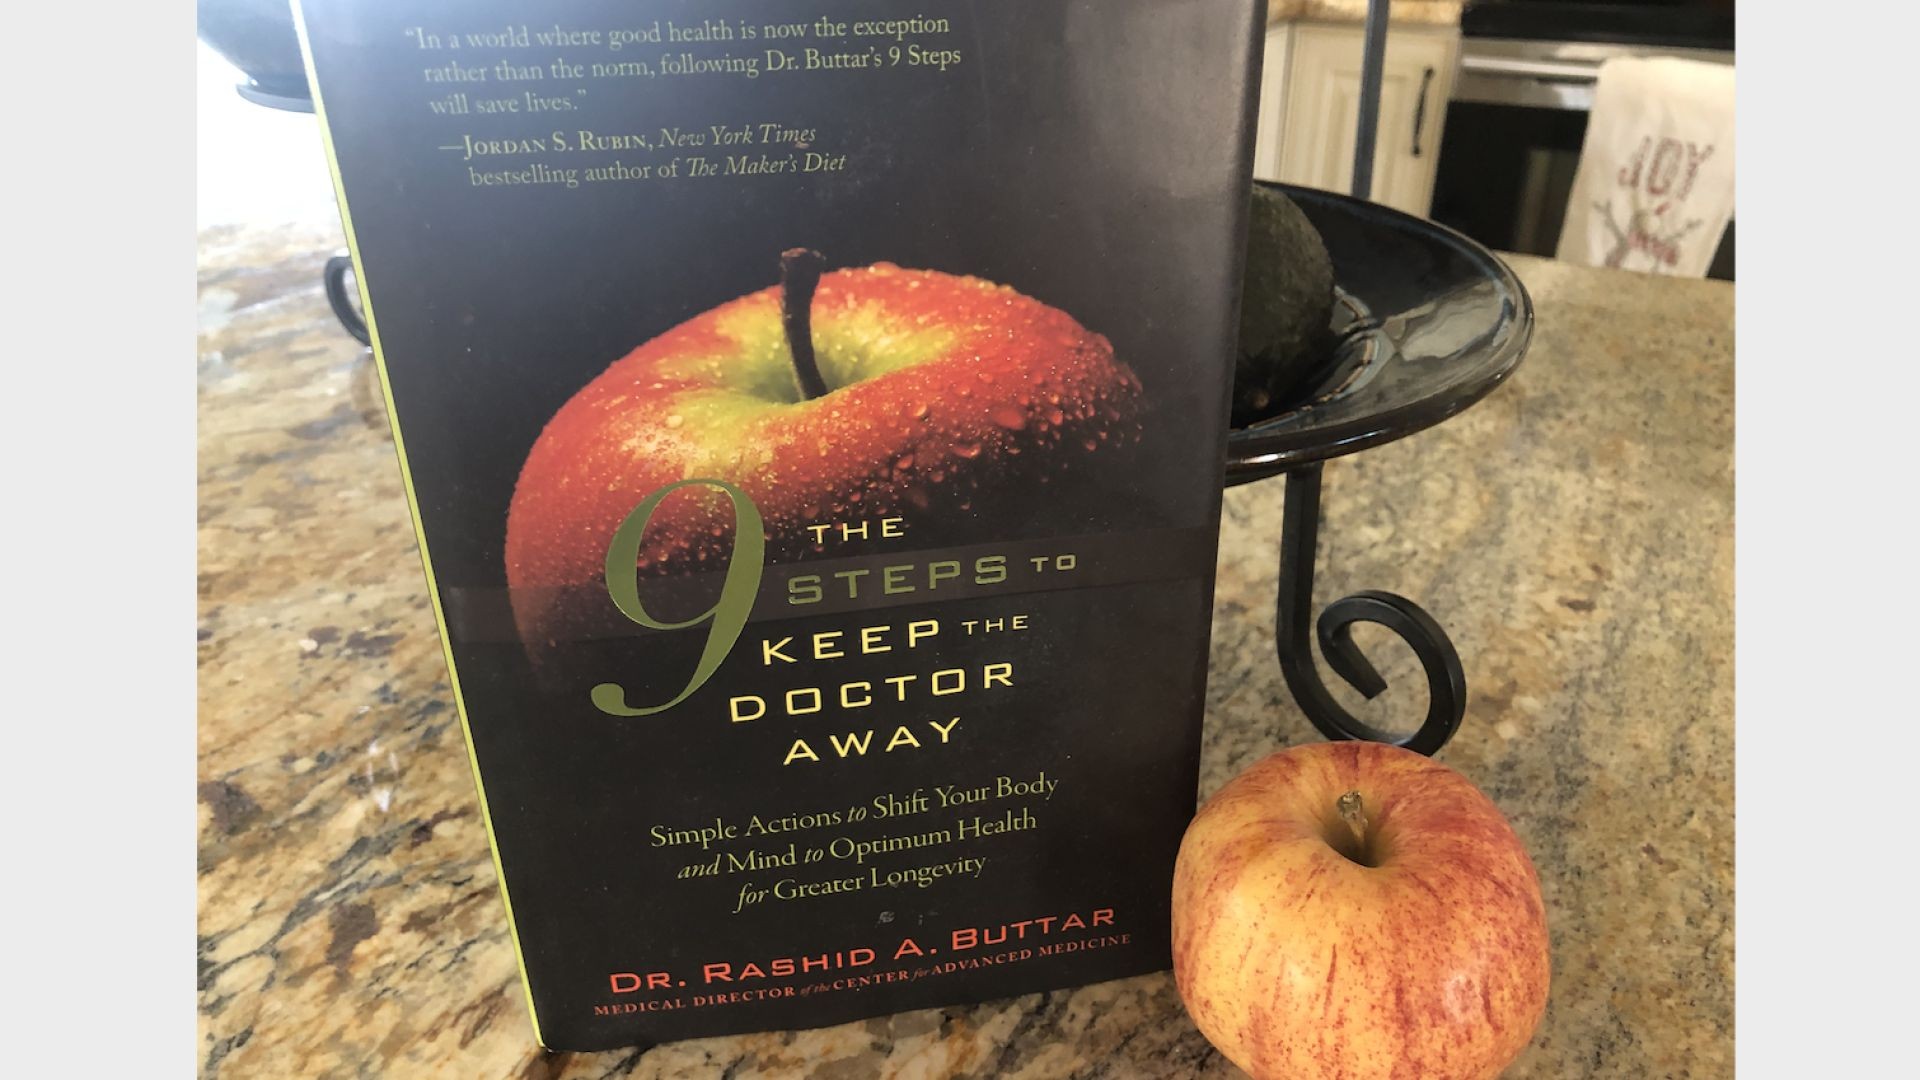 The 9 Steps To Keep The Doctor Away-Highly Recommended! Life-Style to Optimal Health.